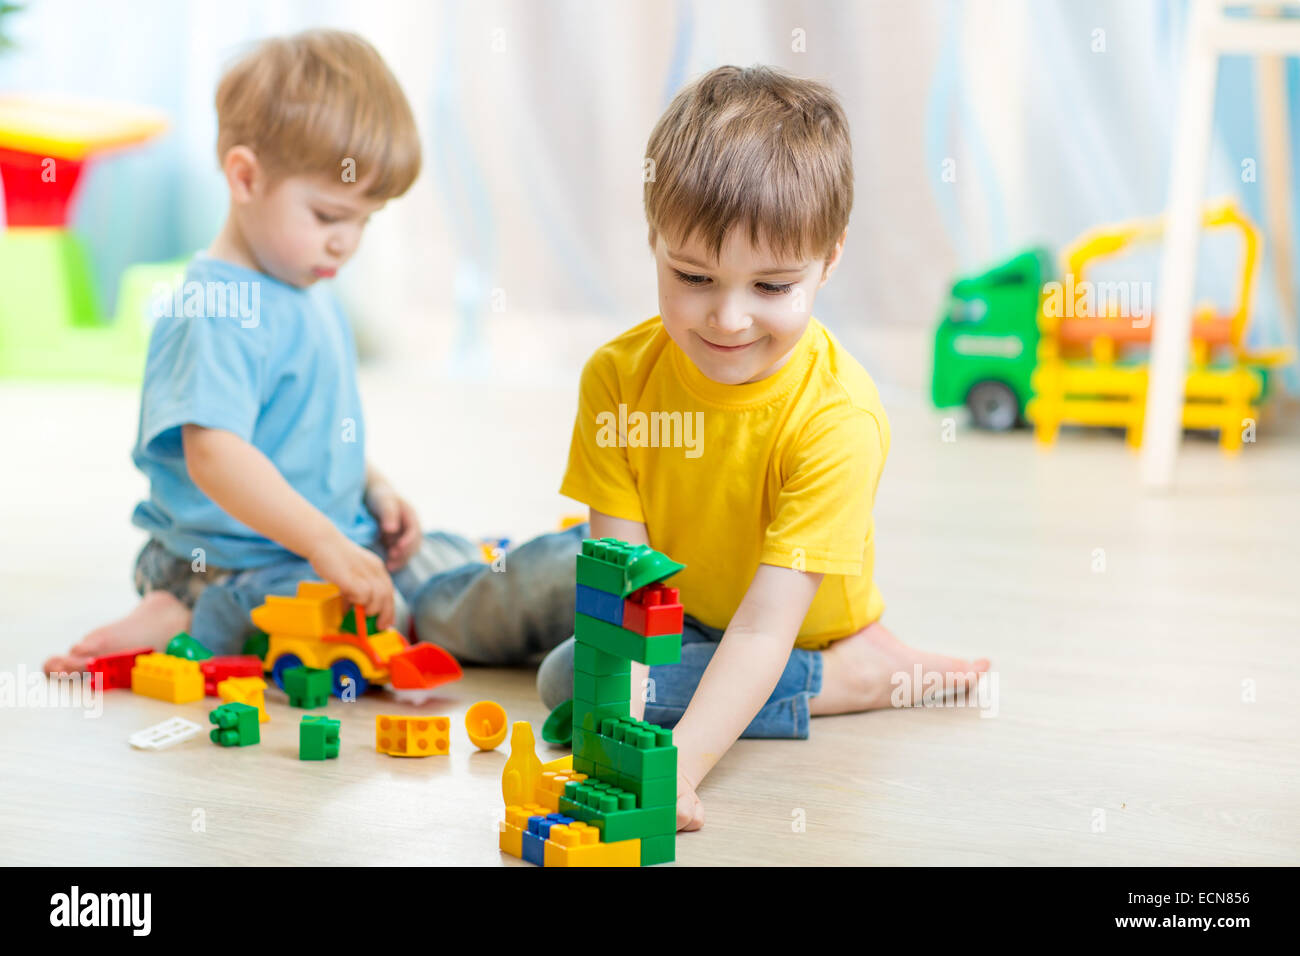 children playing in the room Stock Photo